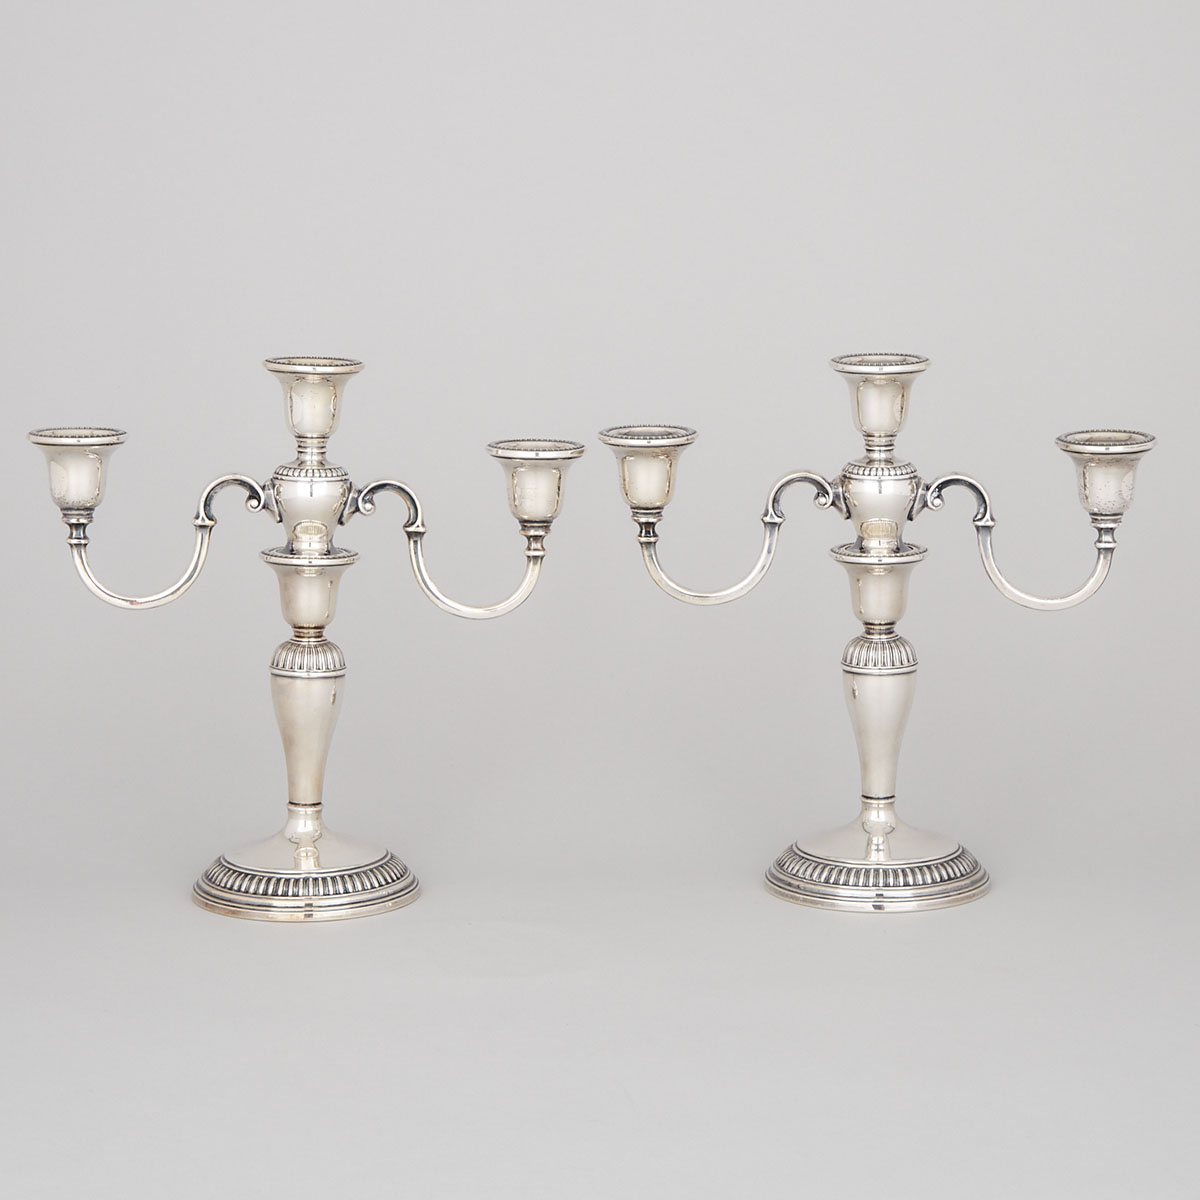 Pair of Victorian Silver Four-Light Candelabra, Hawkesworth, Eyre & Co., Sheffield, 1879/80